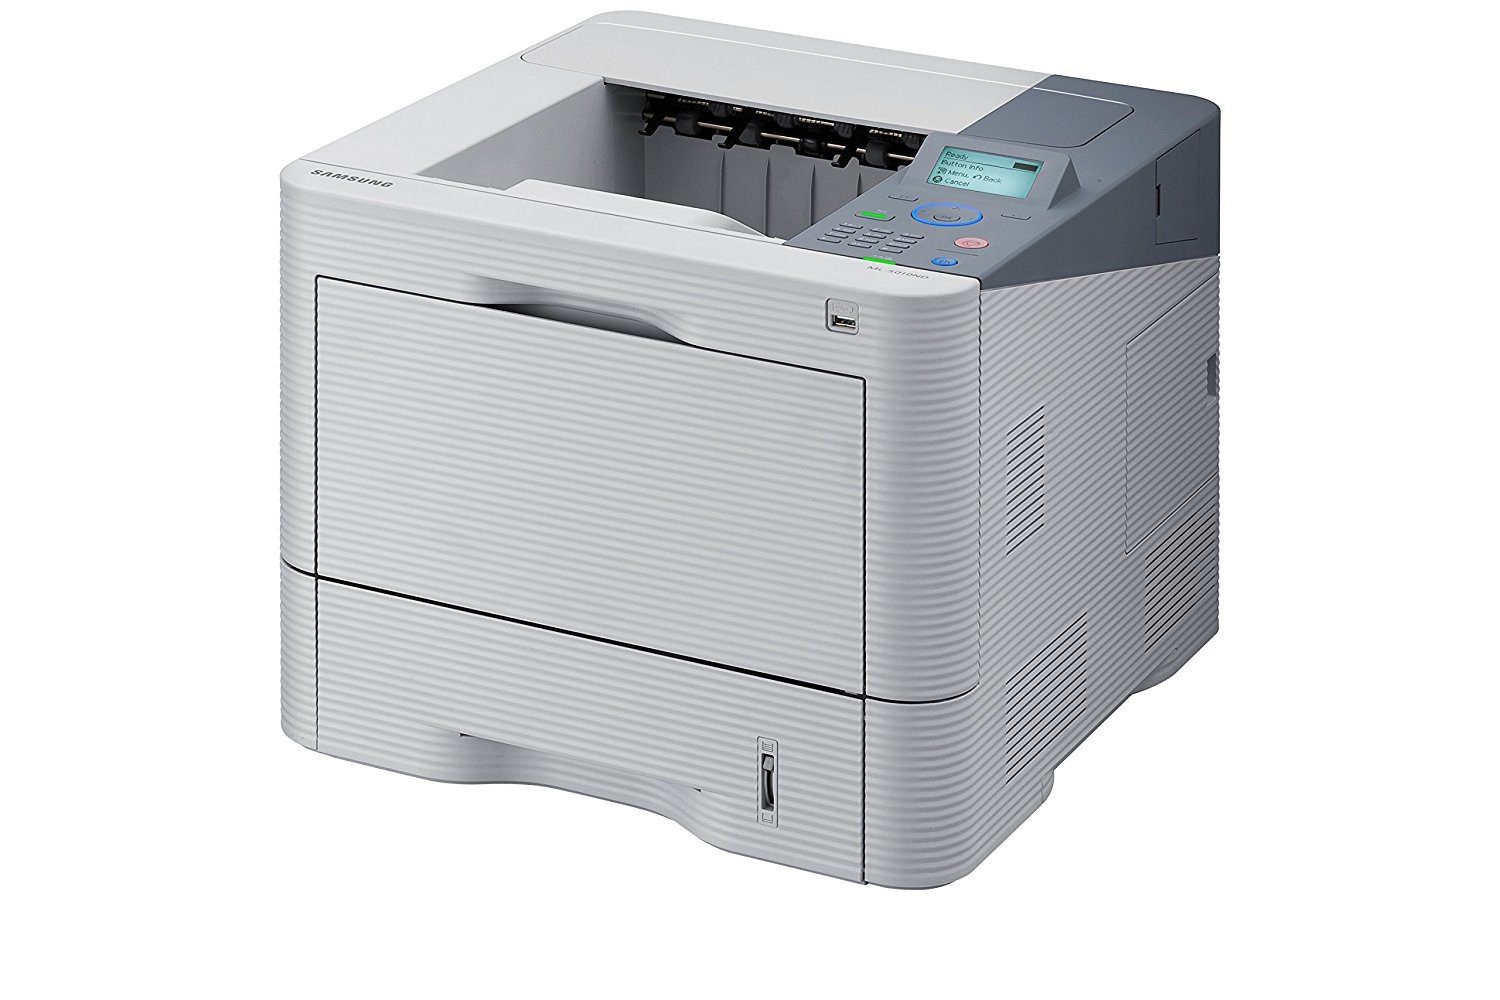 Samsung ML-5010ND 1200 x 1200DPI A4 laser/LED printer ML-5010ND/SEE Professional *Drum New installed